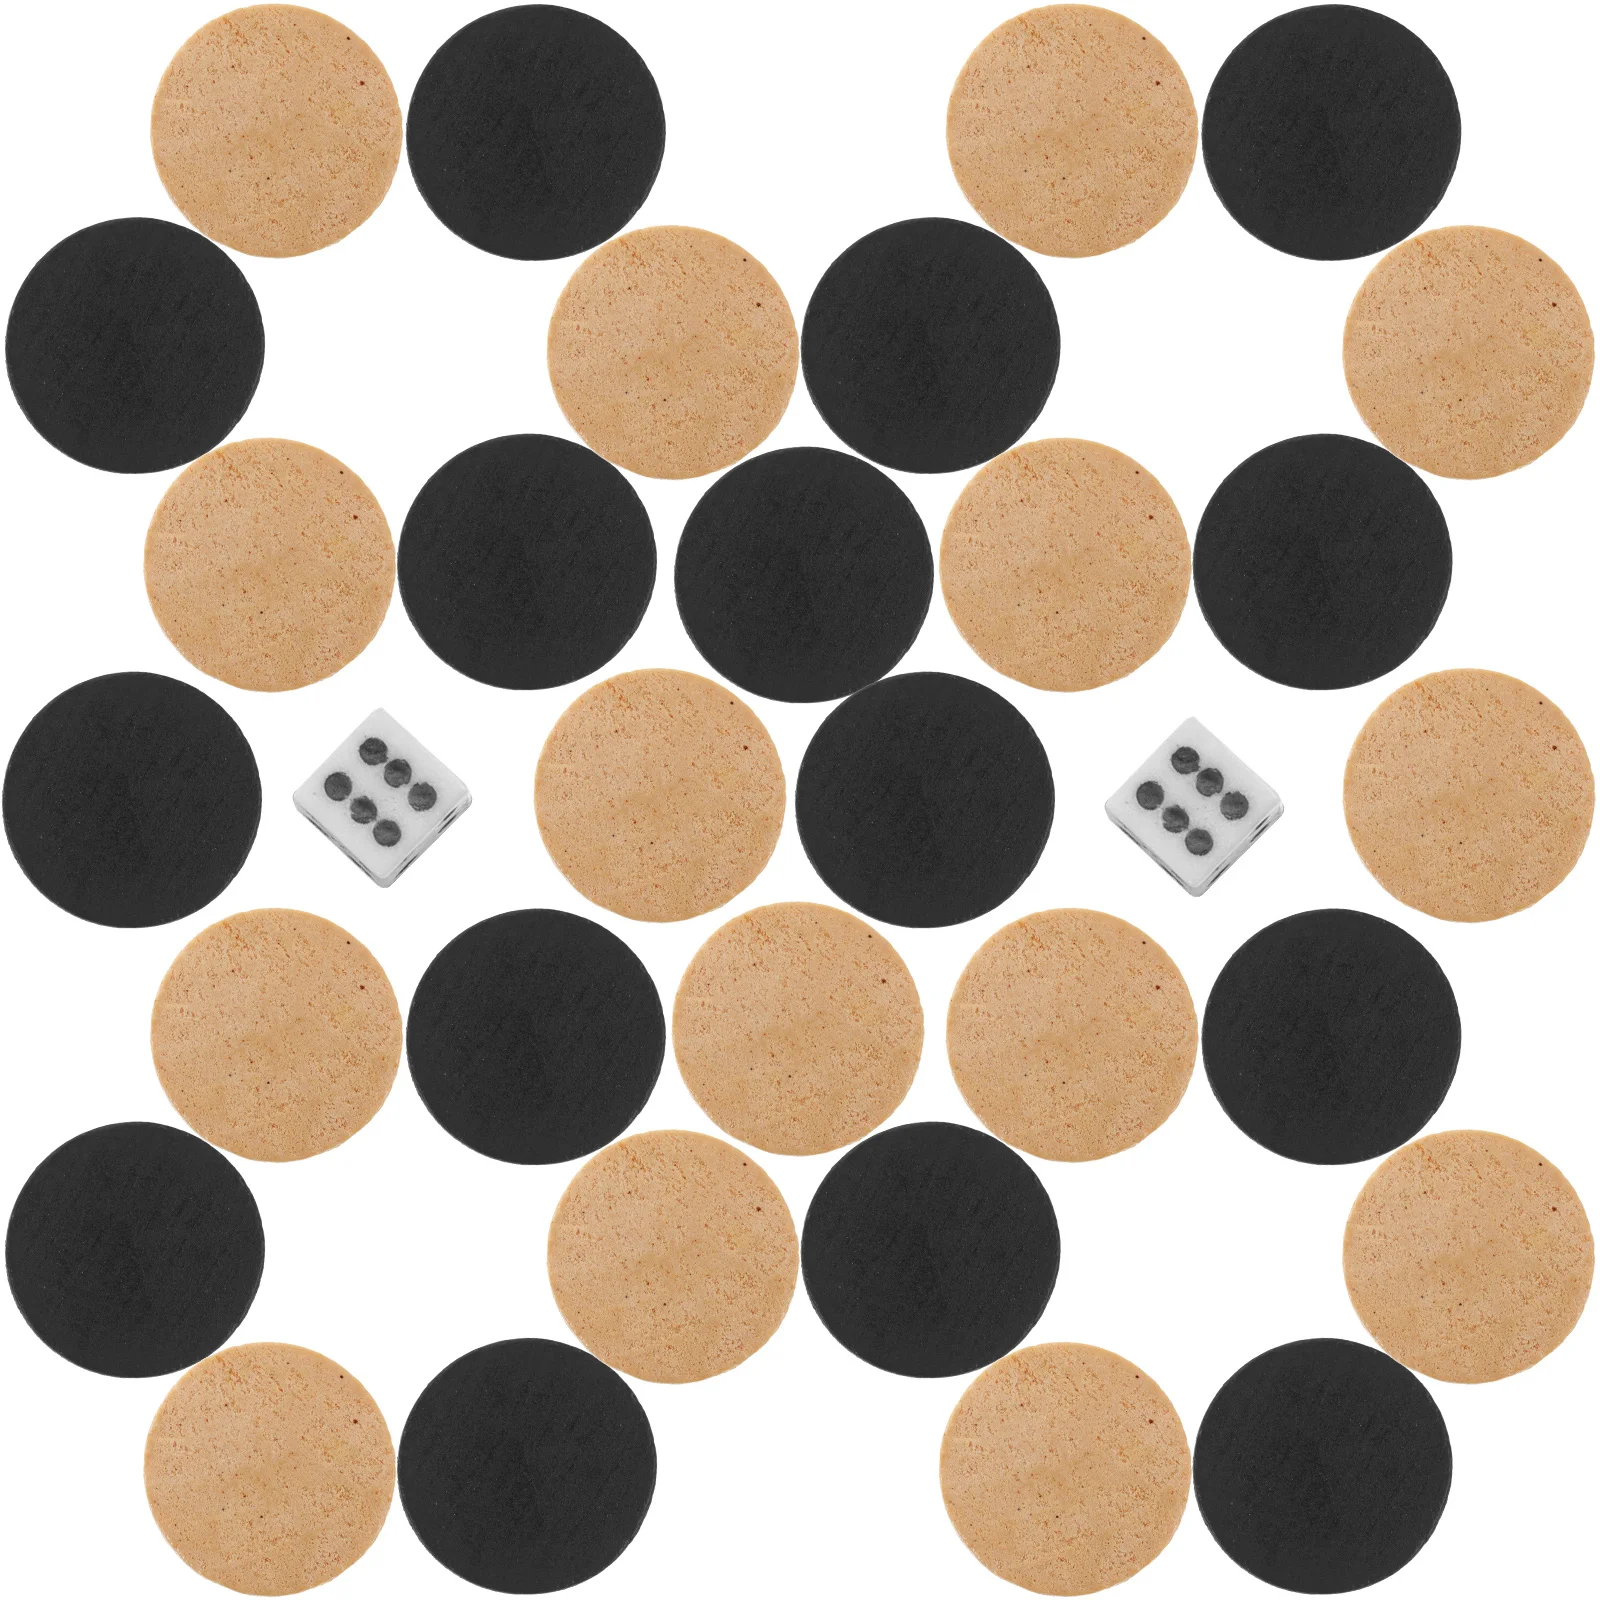 Wooden Draughts Backgammon Black White Chess Pieces Unique Chess for Draughts Checkers for Creative Simple Gifts for Play